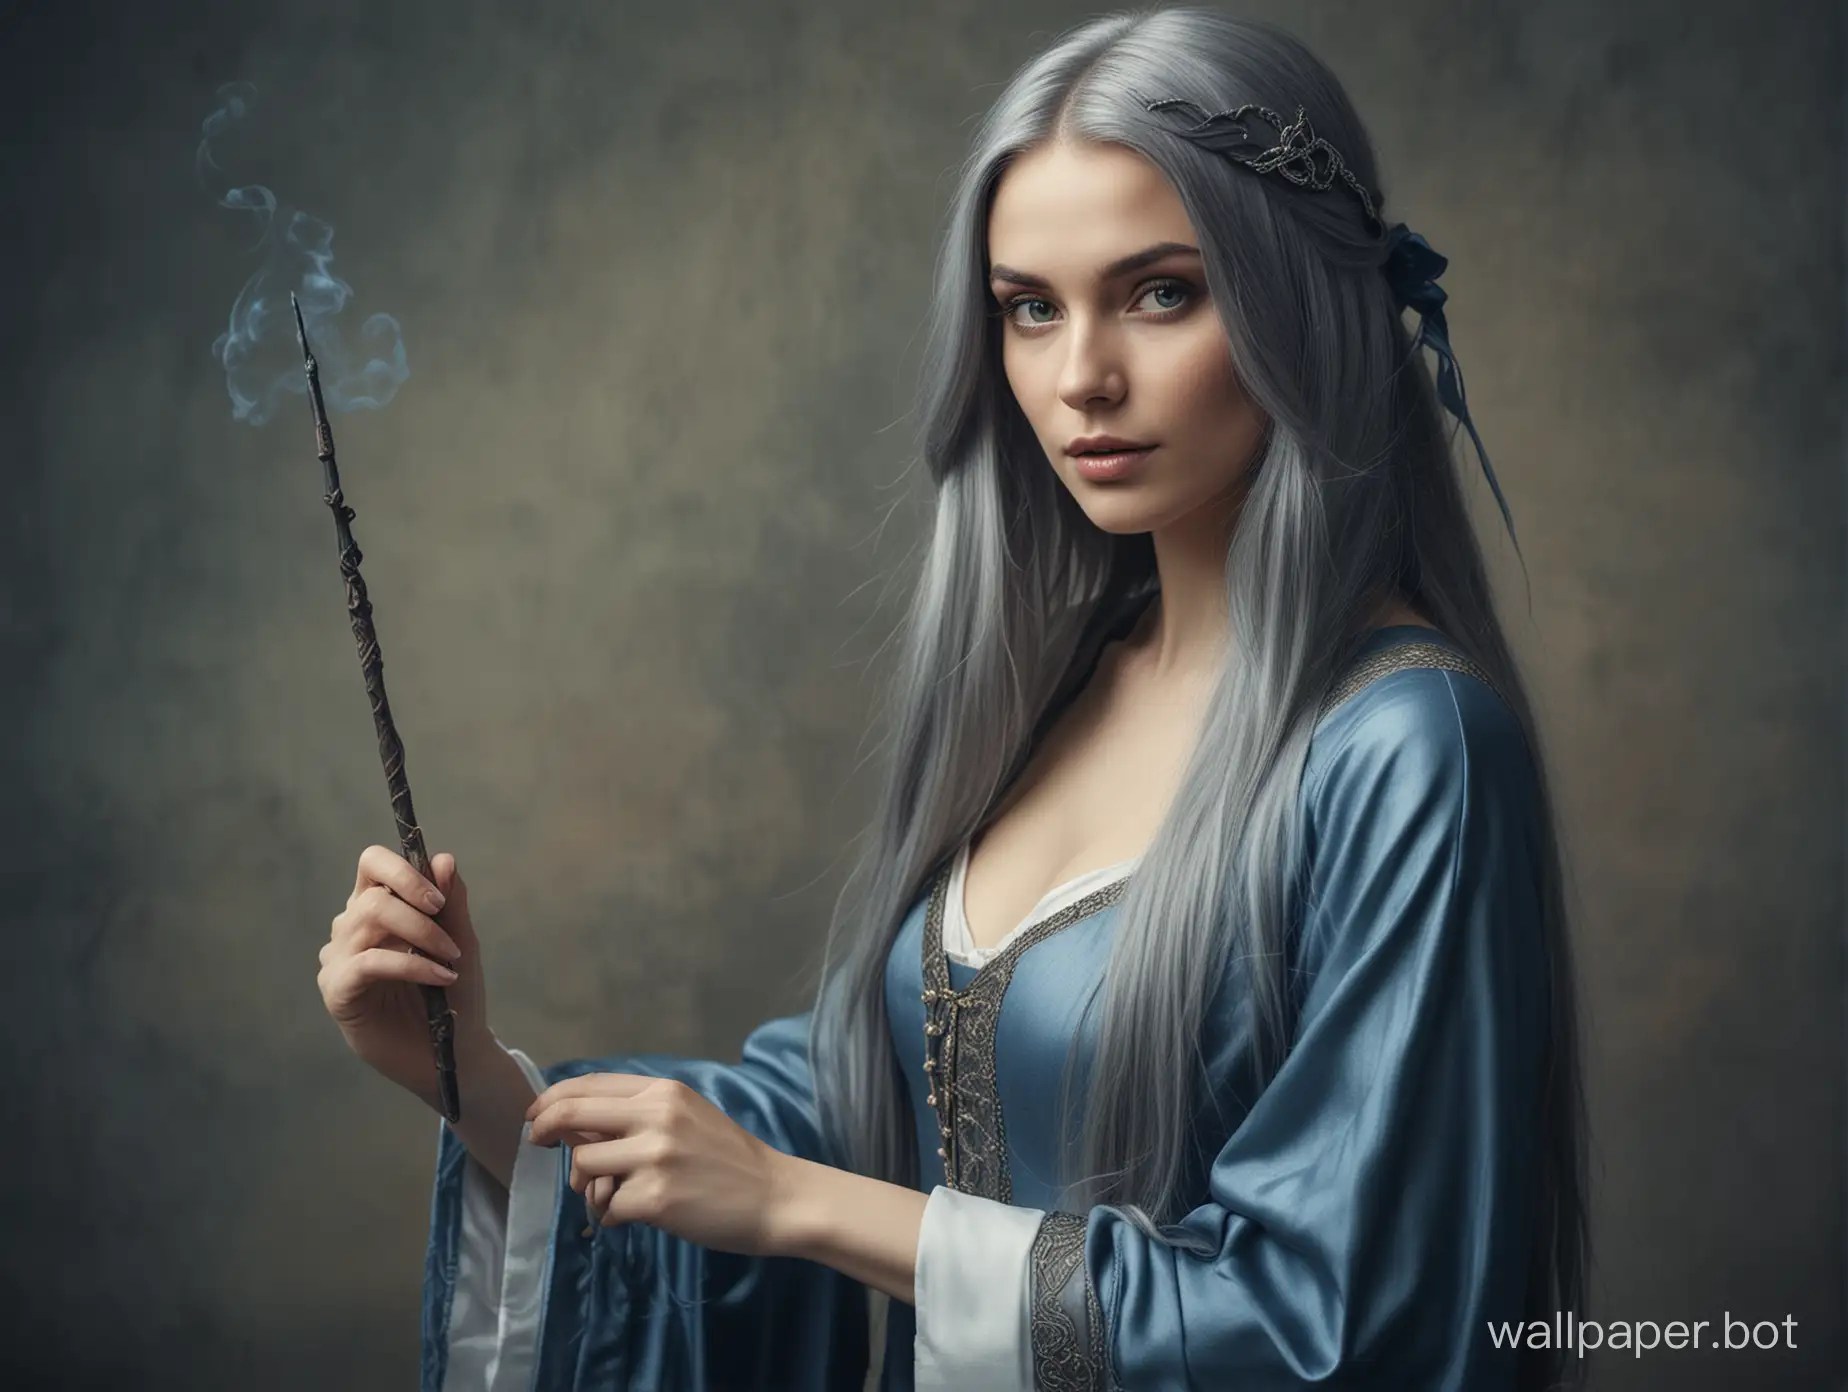 Medieval-Female-Magician-Casting-Spell-with-Ink-Wand